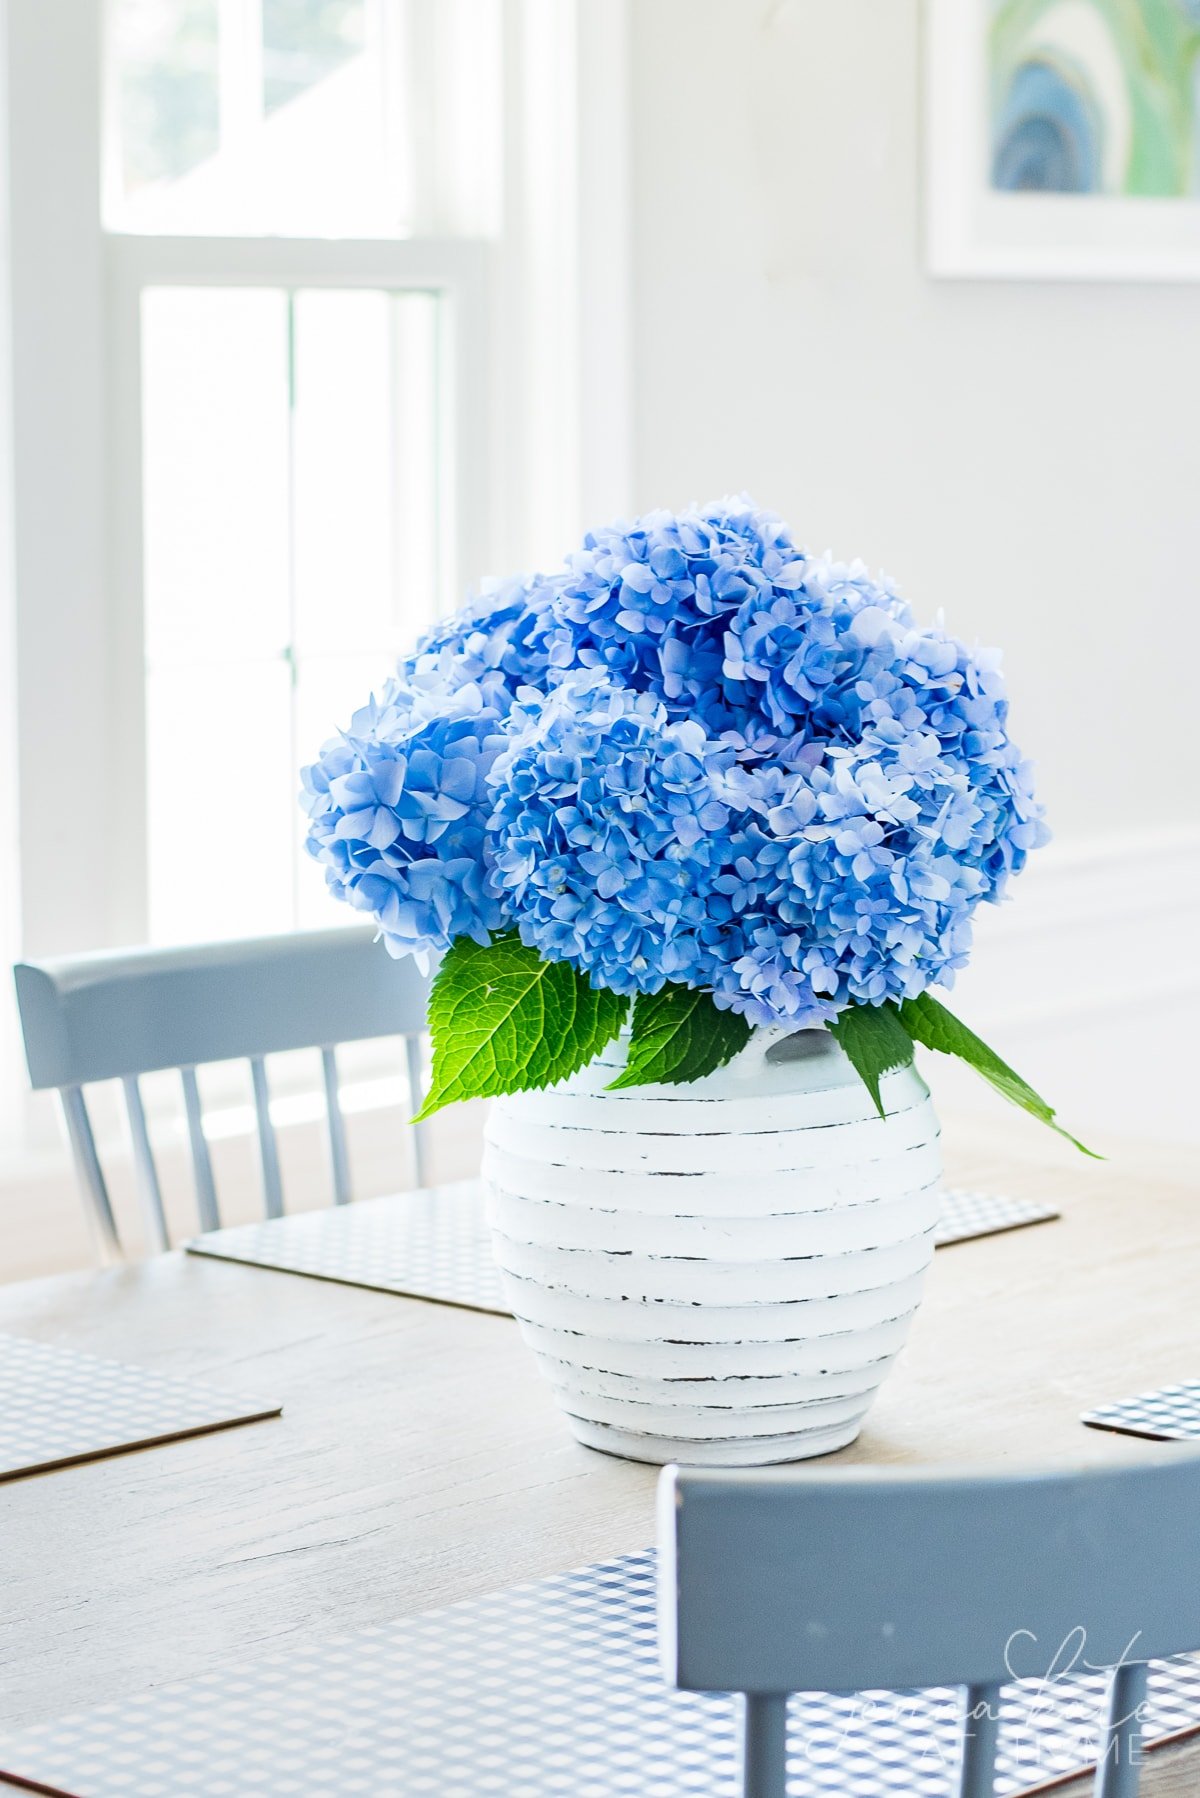 How to keep cut hydrangeas from wilting